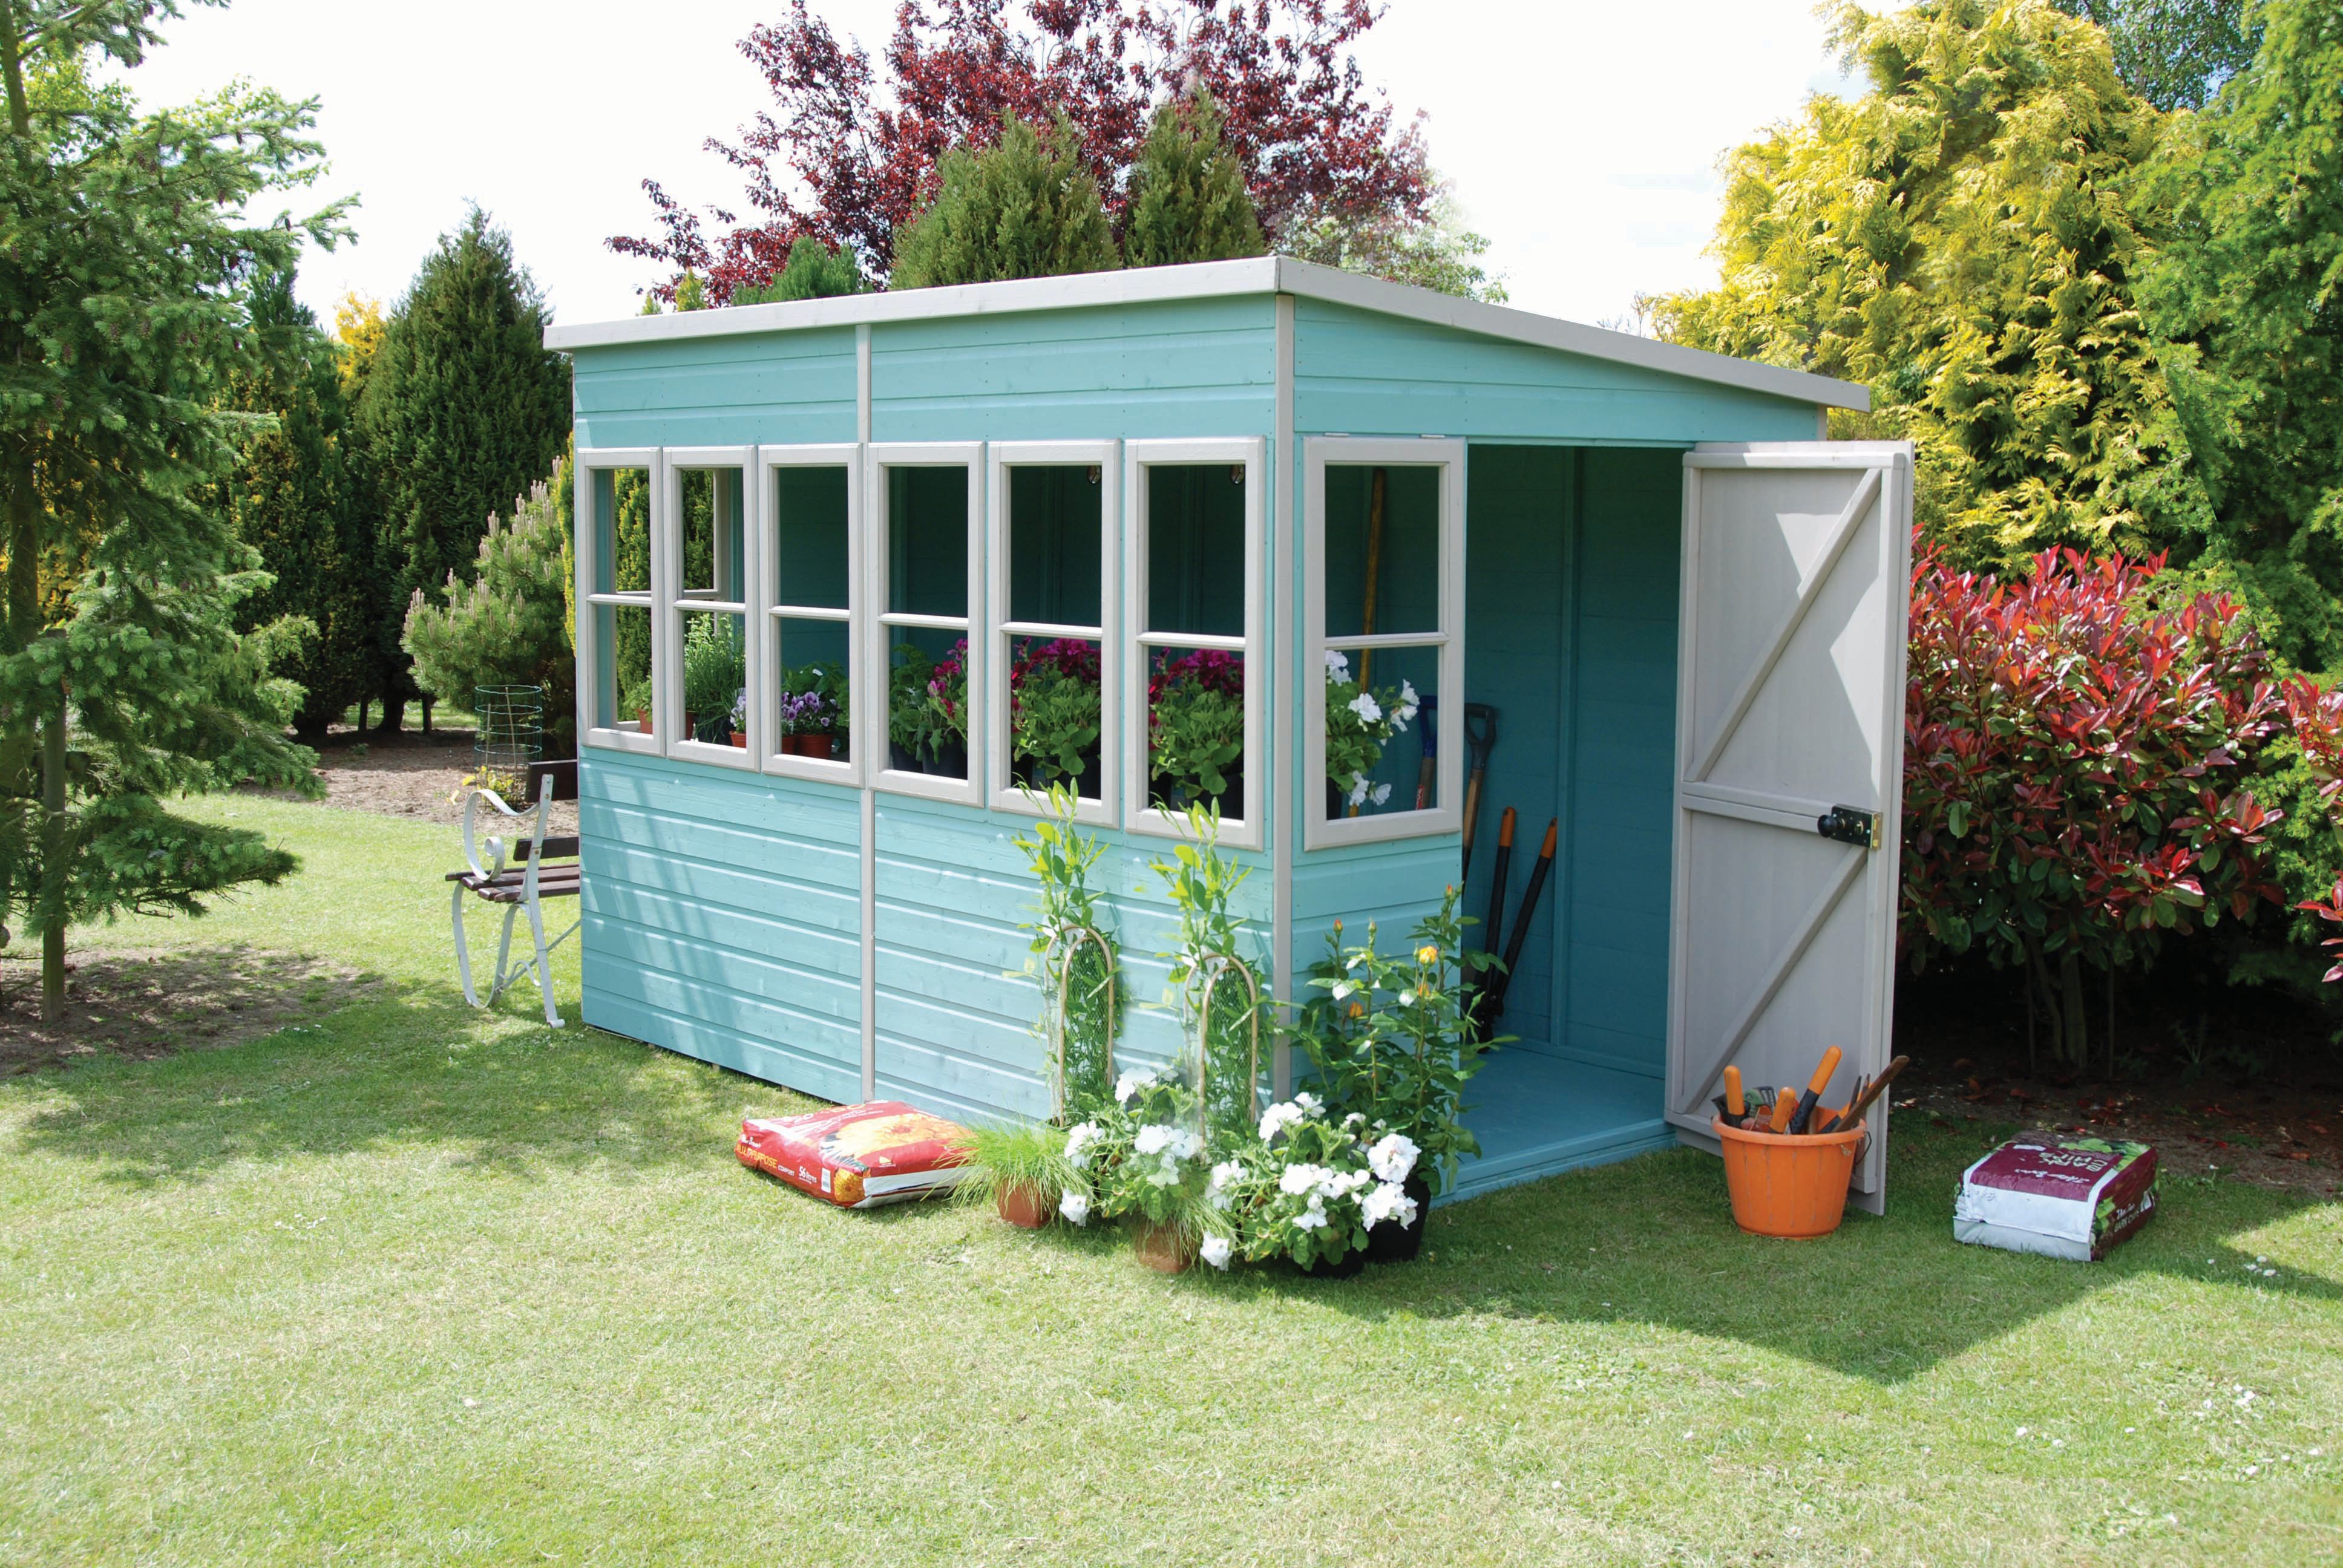 Shire 10 x 6ft Large Timber Pent Potting Shed with Opening Windows